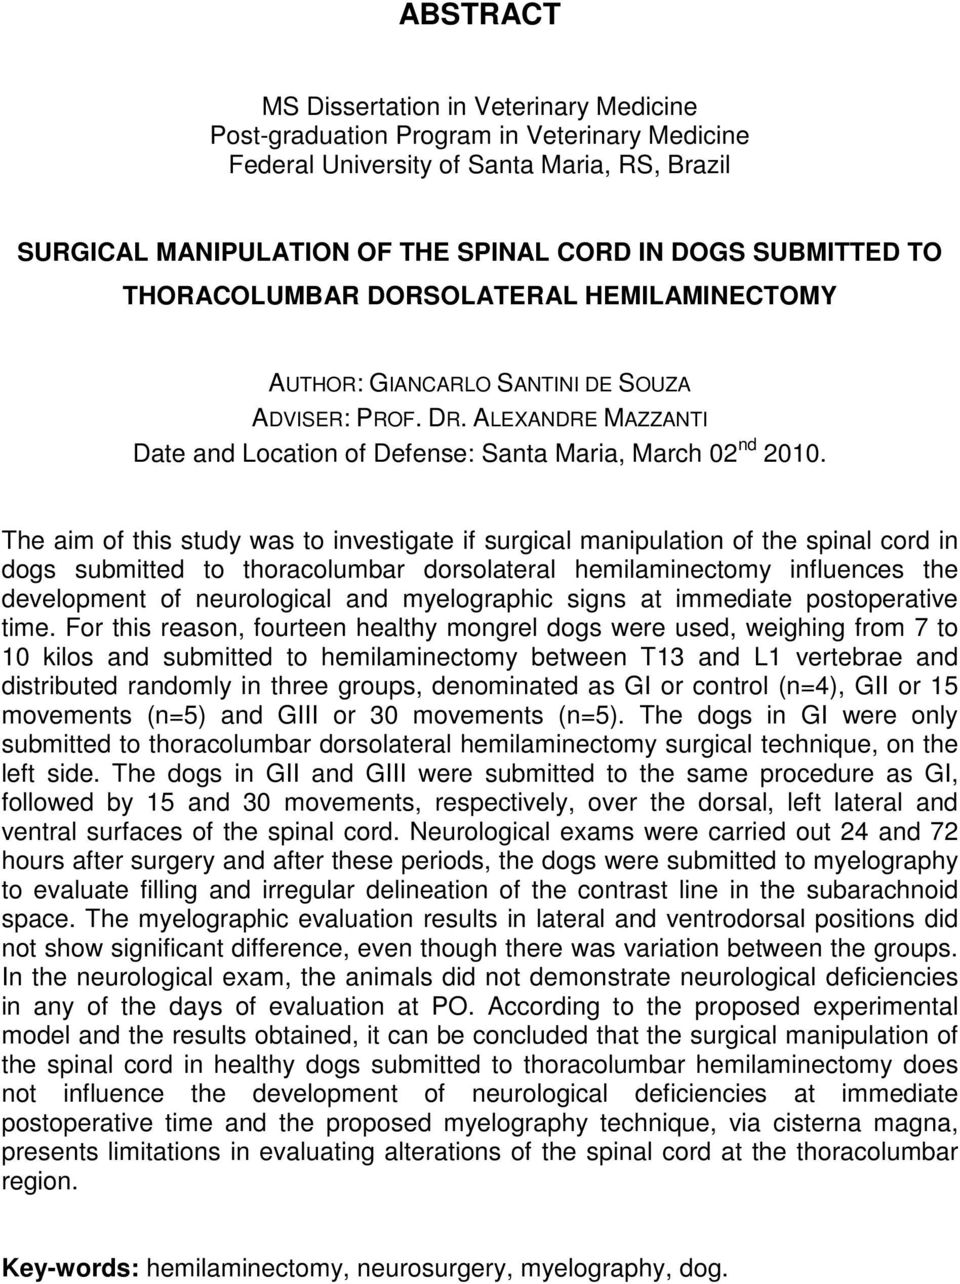 The aim of this study was to investigate if surgical manipulation of the spinal cord in dogs submitted to thoracolumbar dorsolateral hemilaminectomy influences the development of neurological and